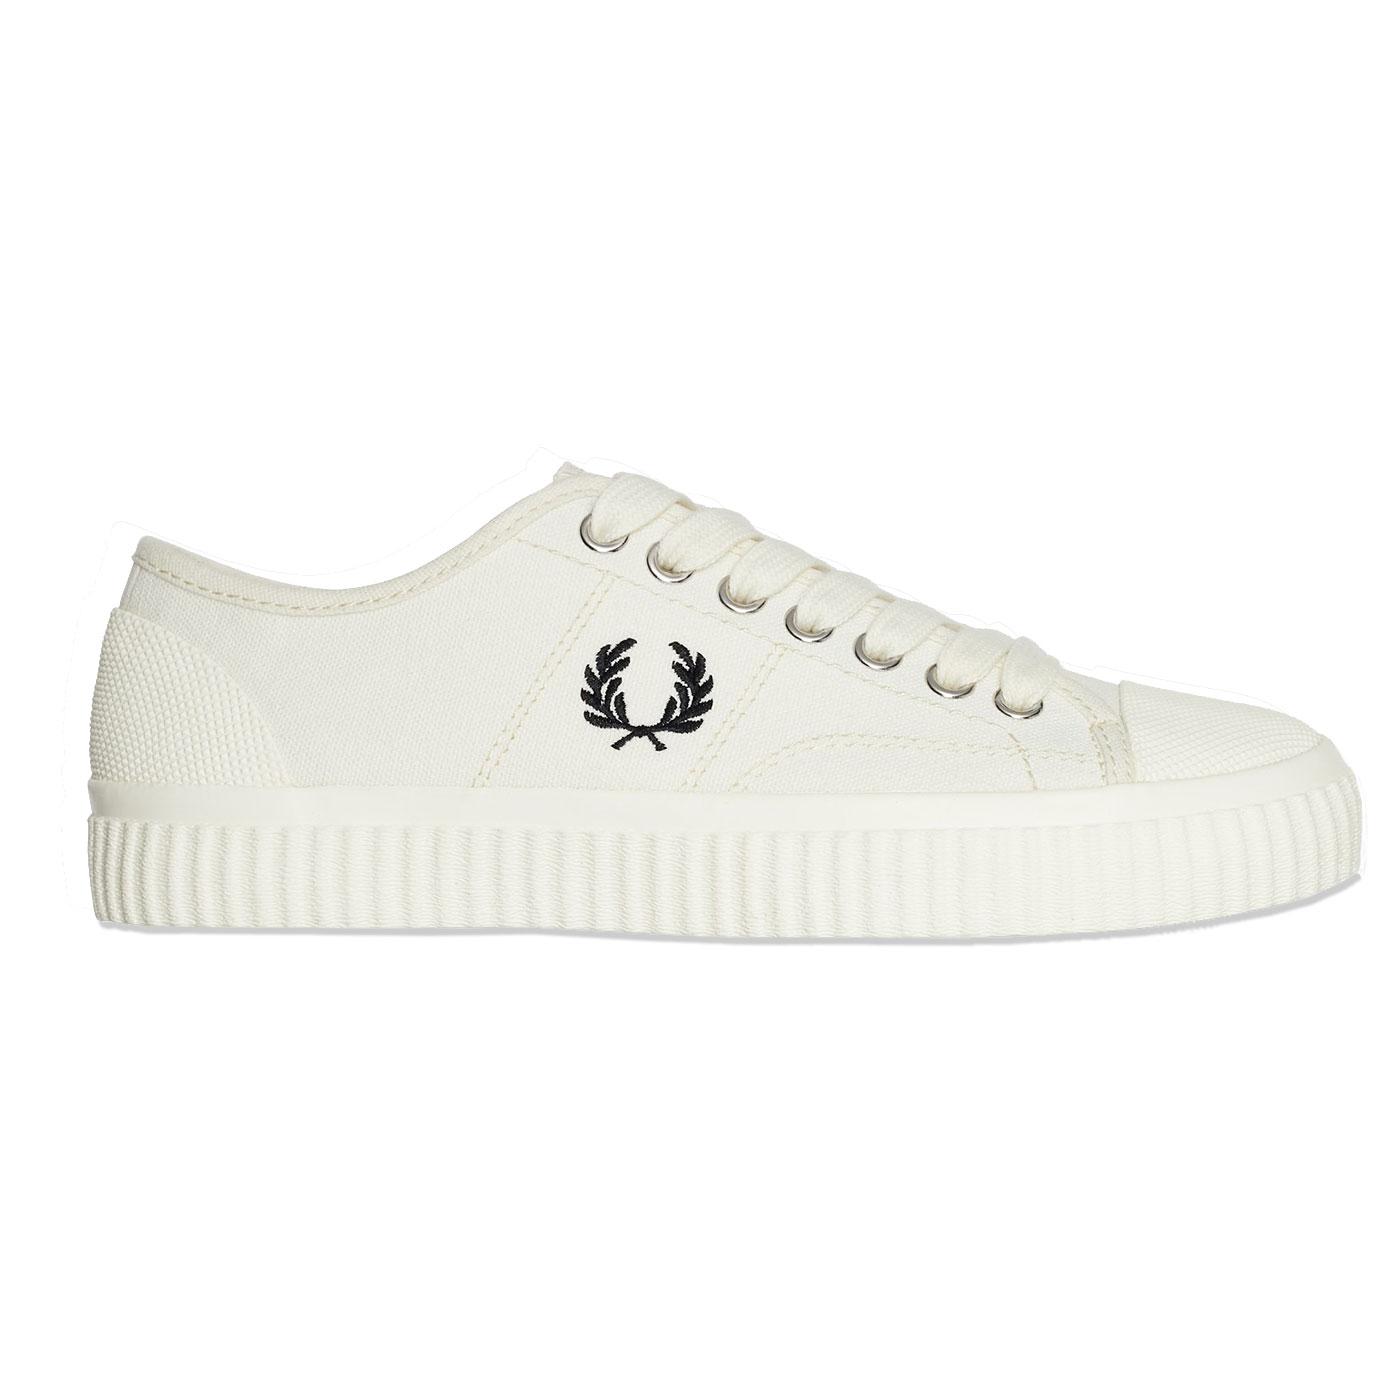 FRED PERRY 'Hughes Low' Men's Canvas Trainers Light Ecru